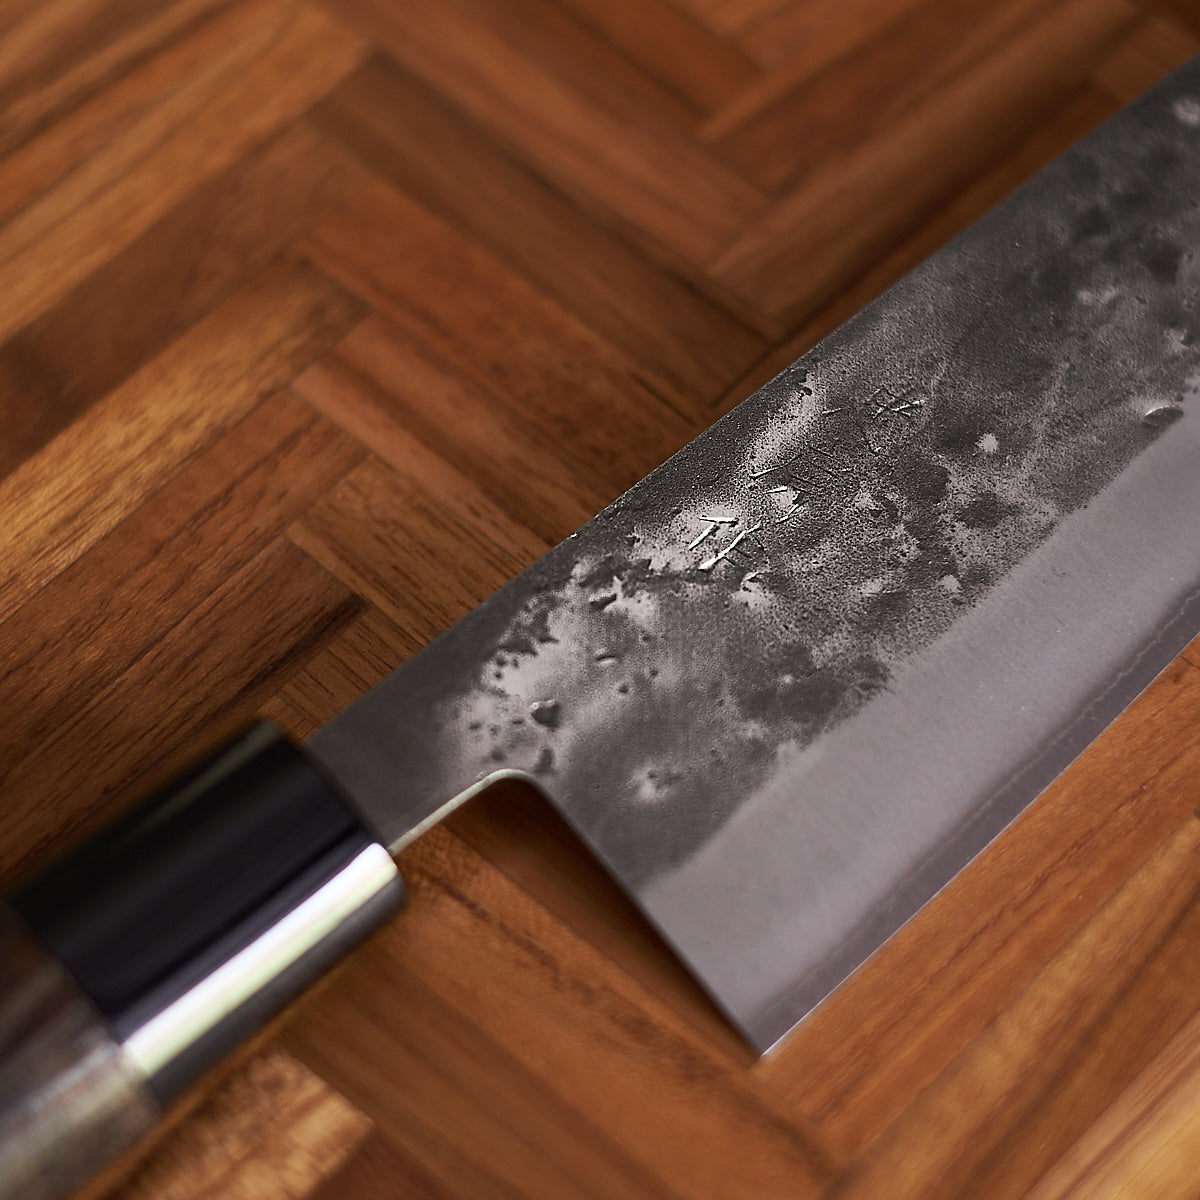 The Tadafusa Bocho Santoku Knife, known for its all-purpose capabilities and vegetable focus, offers the traditional Japanese style.